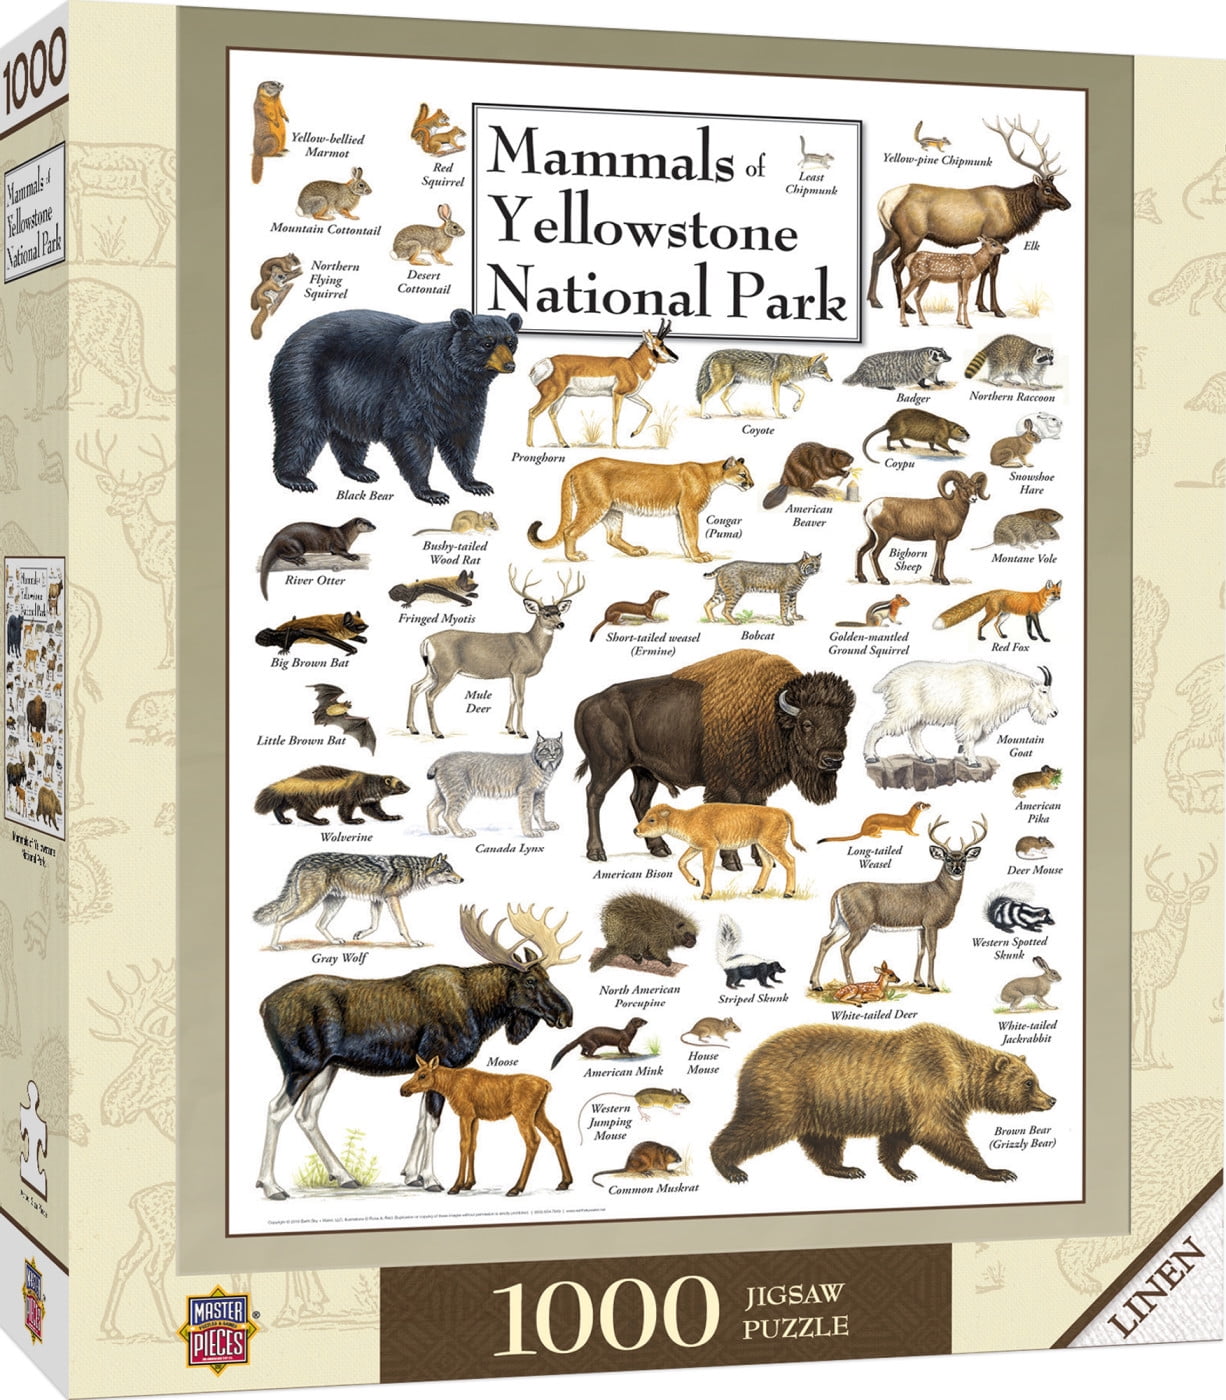 National Park 100% Made in USA 1000 Pieces MasterPieces Xplorer Maps Jigsaw Puzzle Yellowstone 